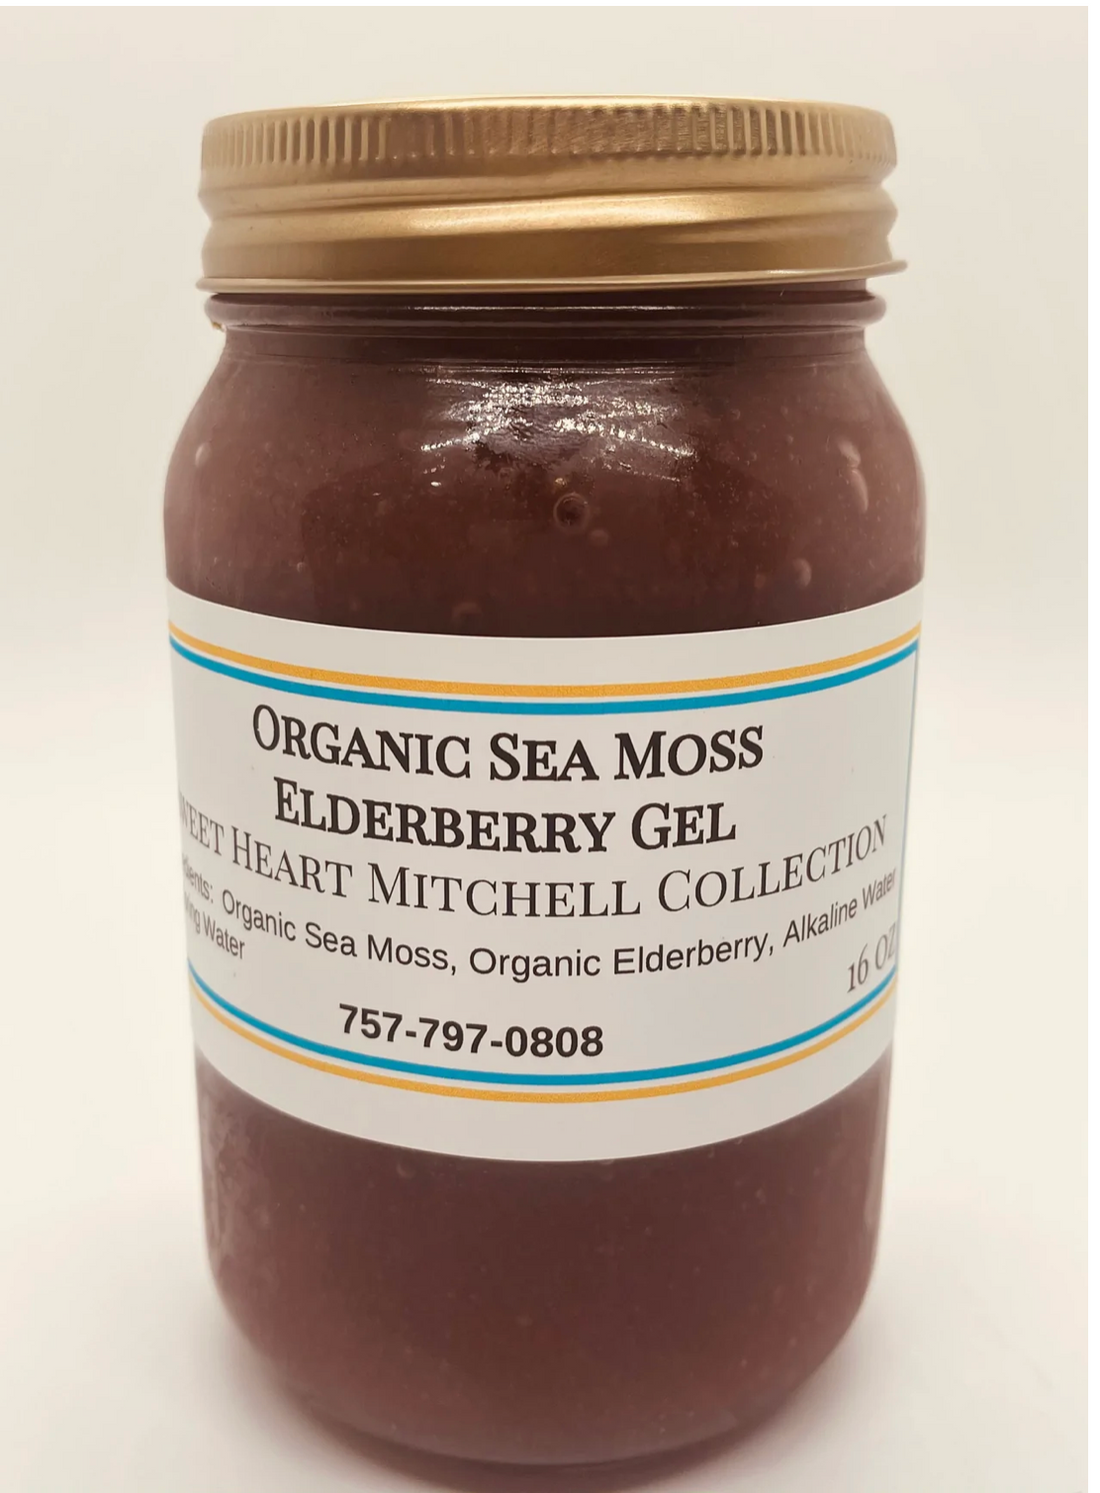 Frequently asked questions about Sea Moss